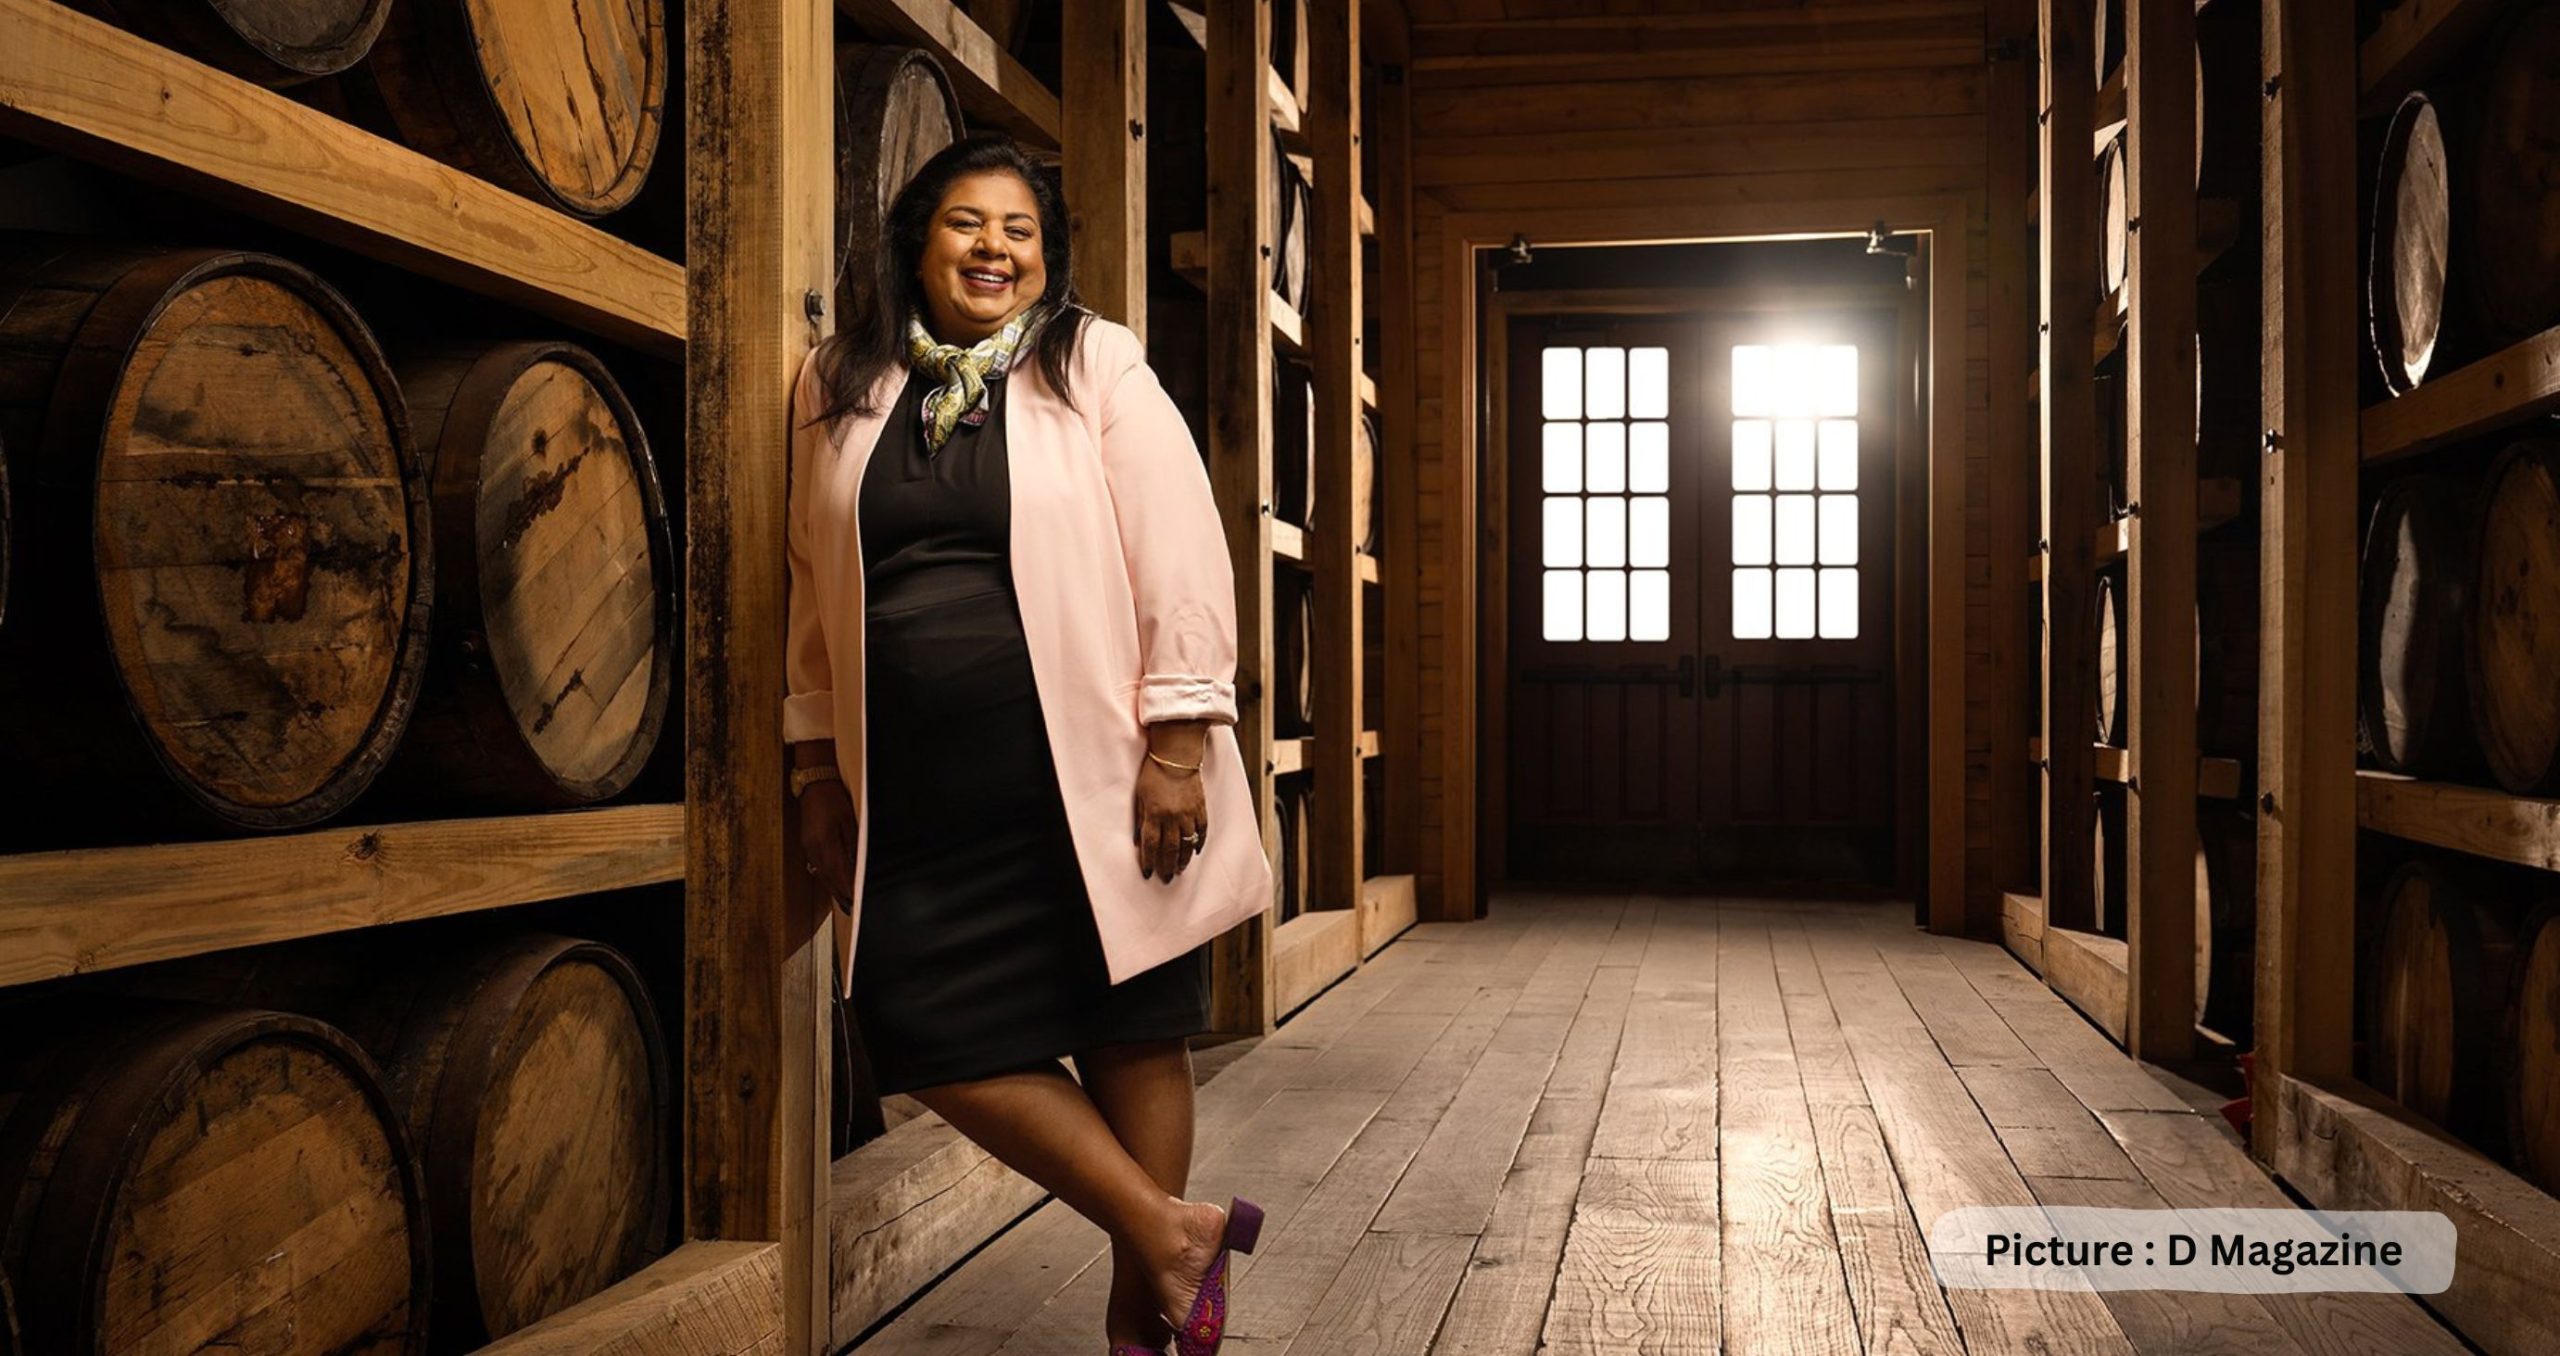 Ann Mukherjee Proves You Can Change Liquor Industry From Within